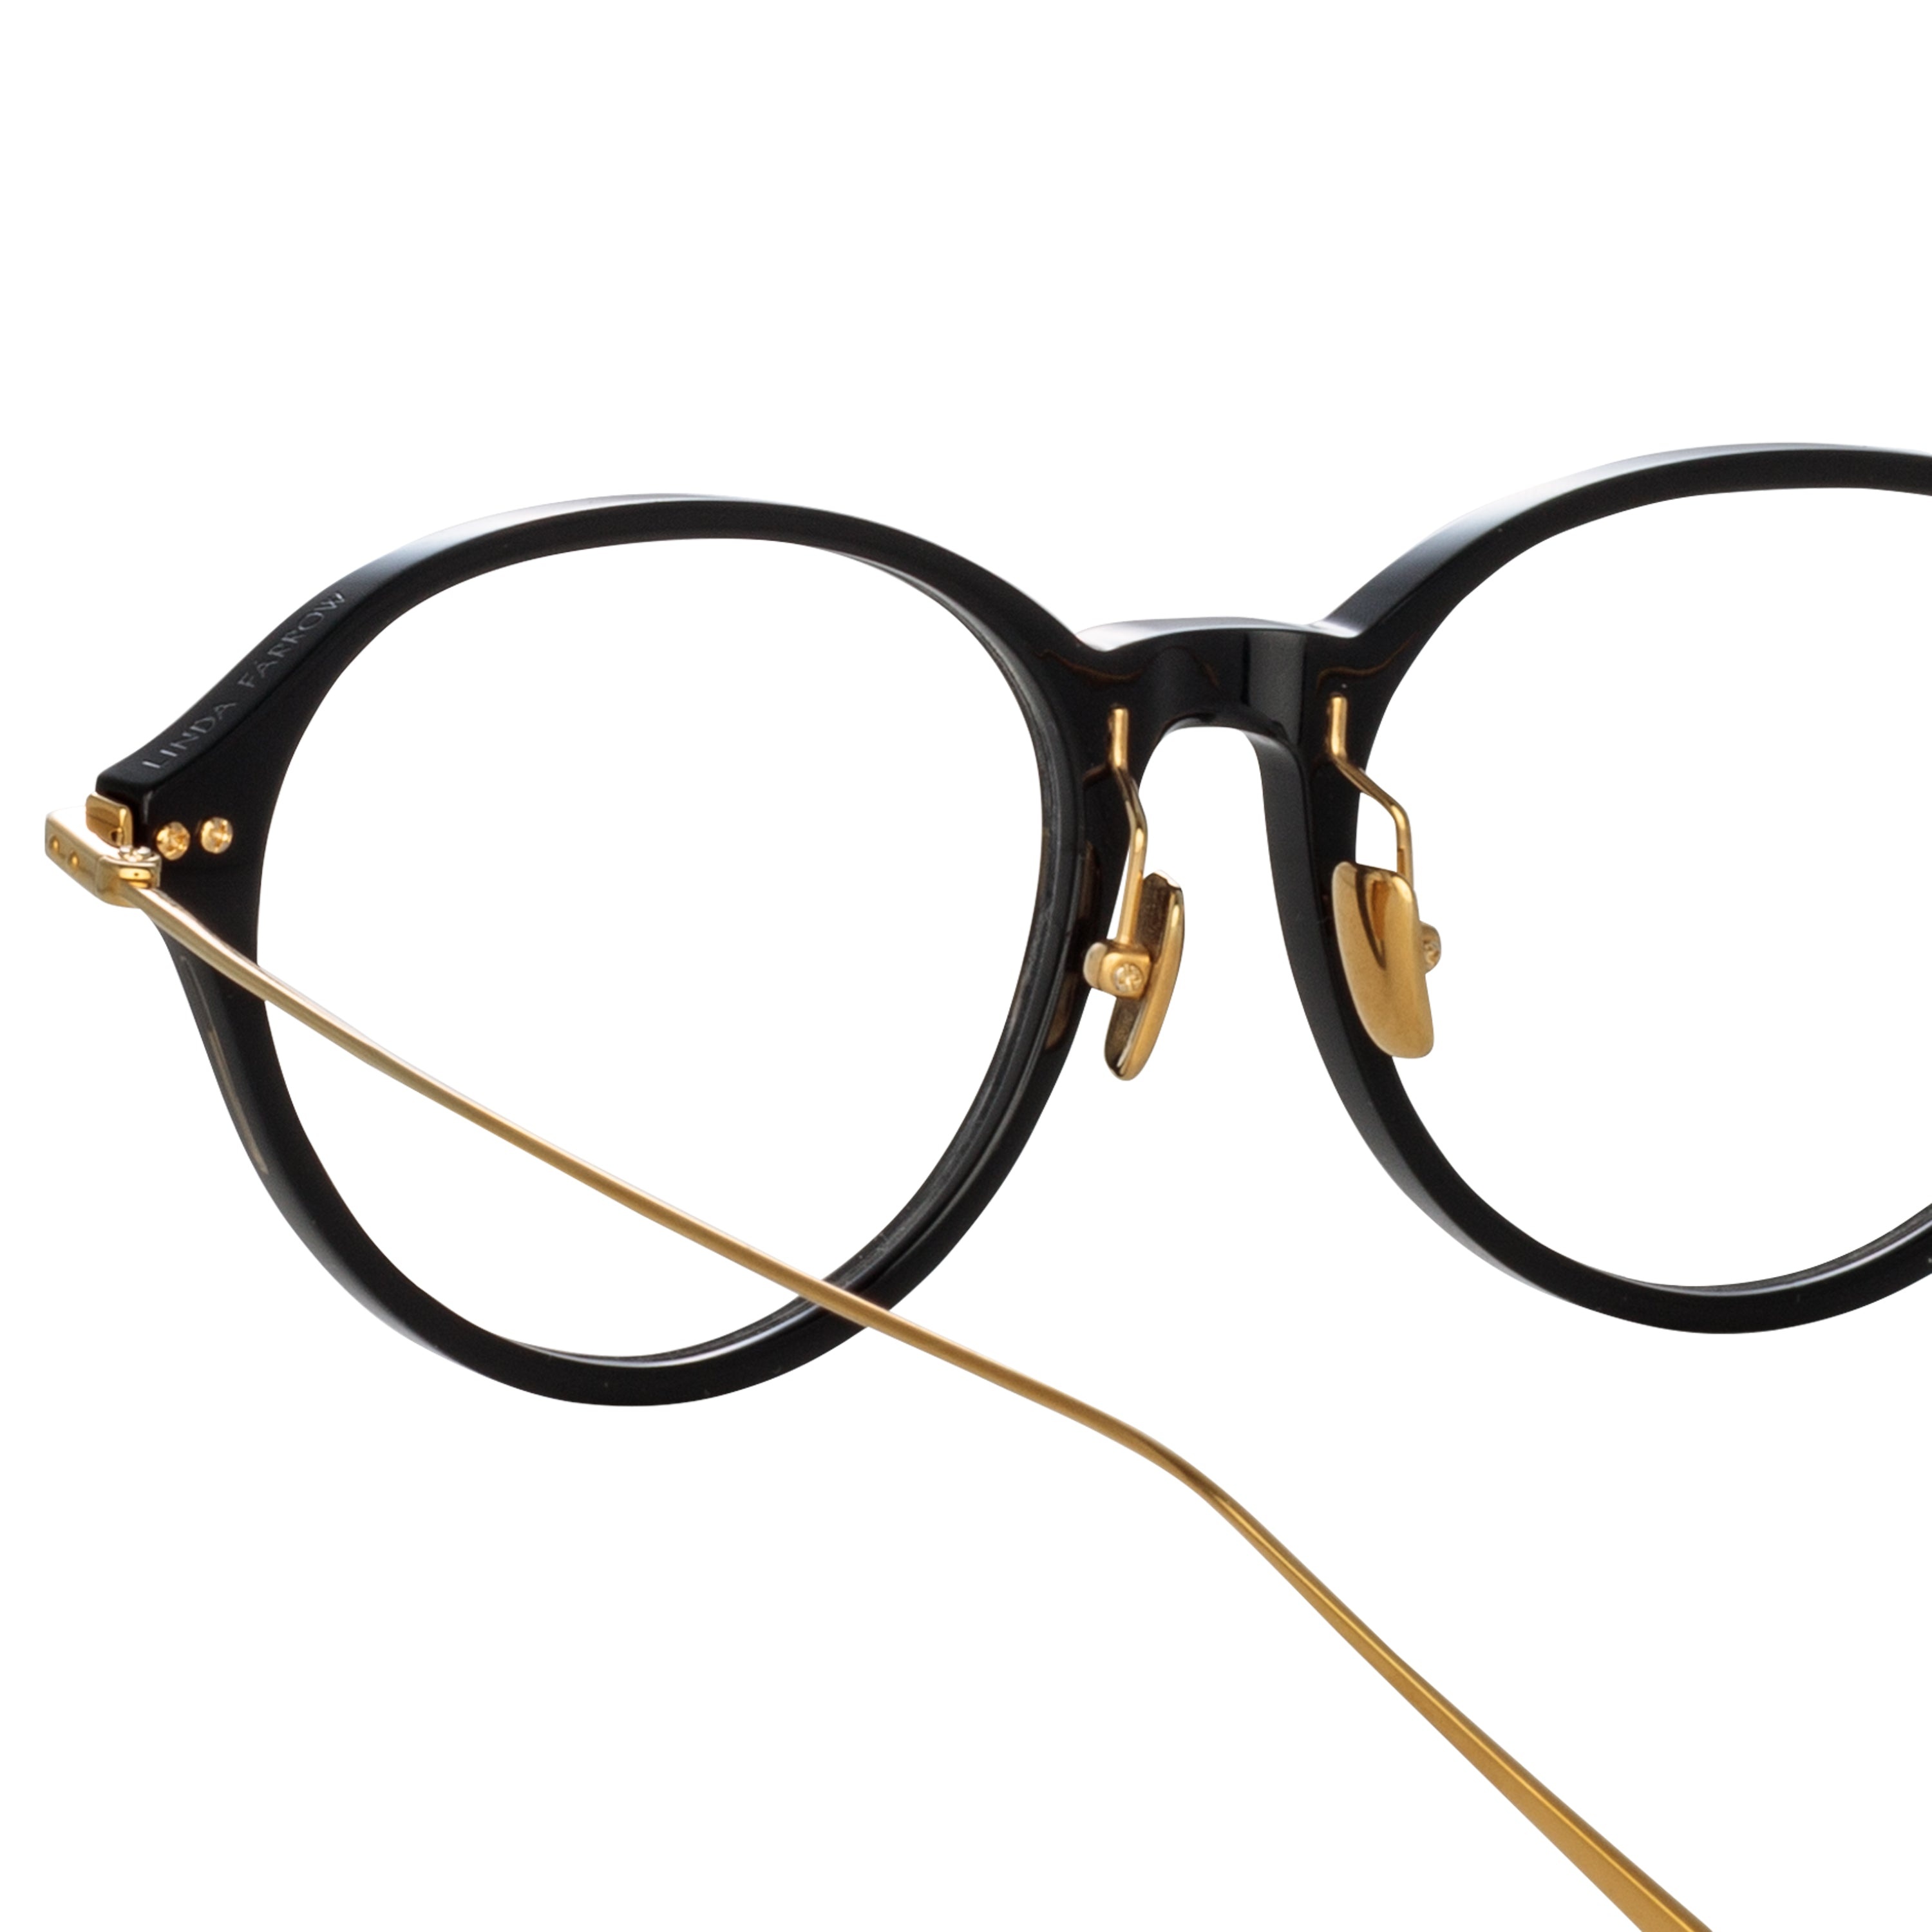 PEARCE OVAL OPTICAL FRAME IN BLACK (ASIAN FIT) - 5